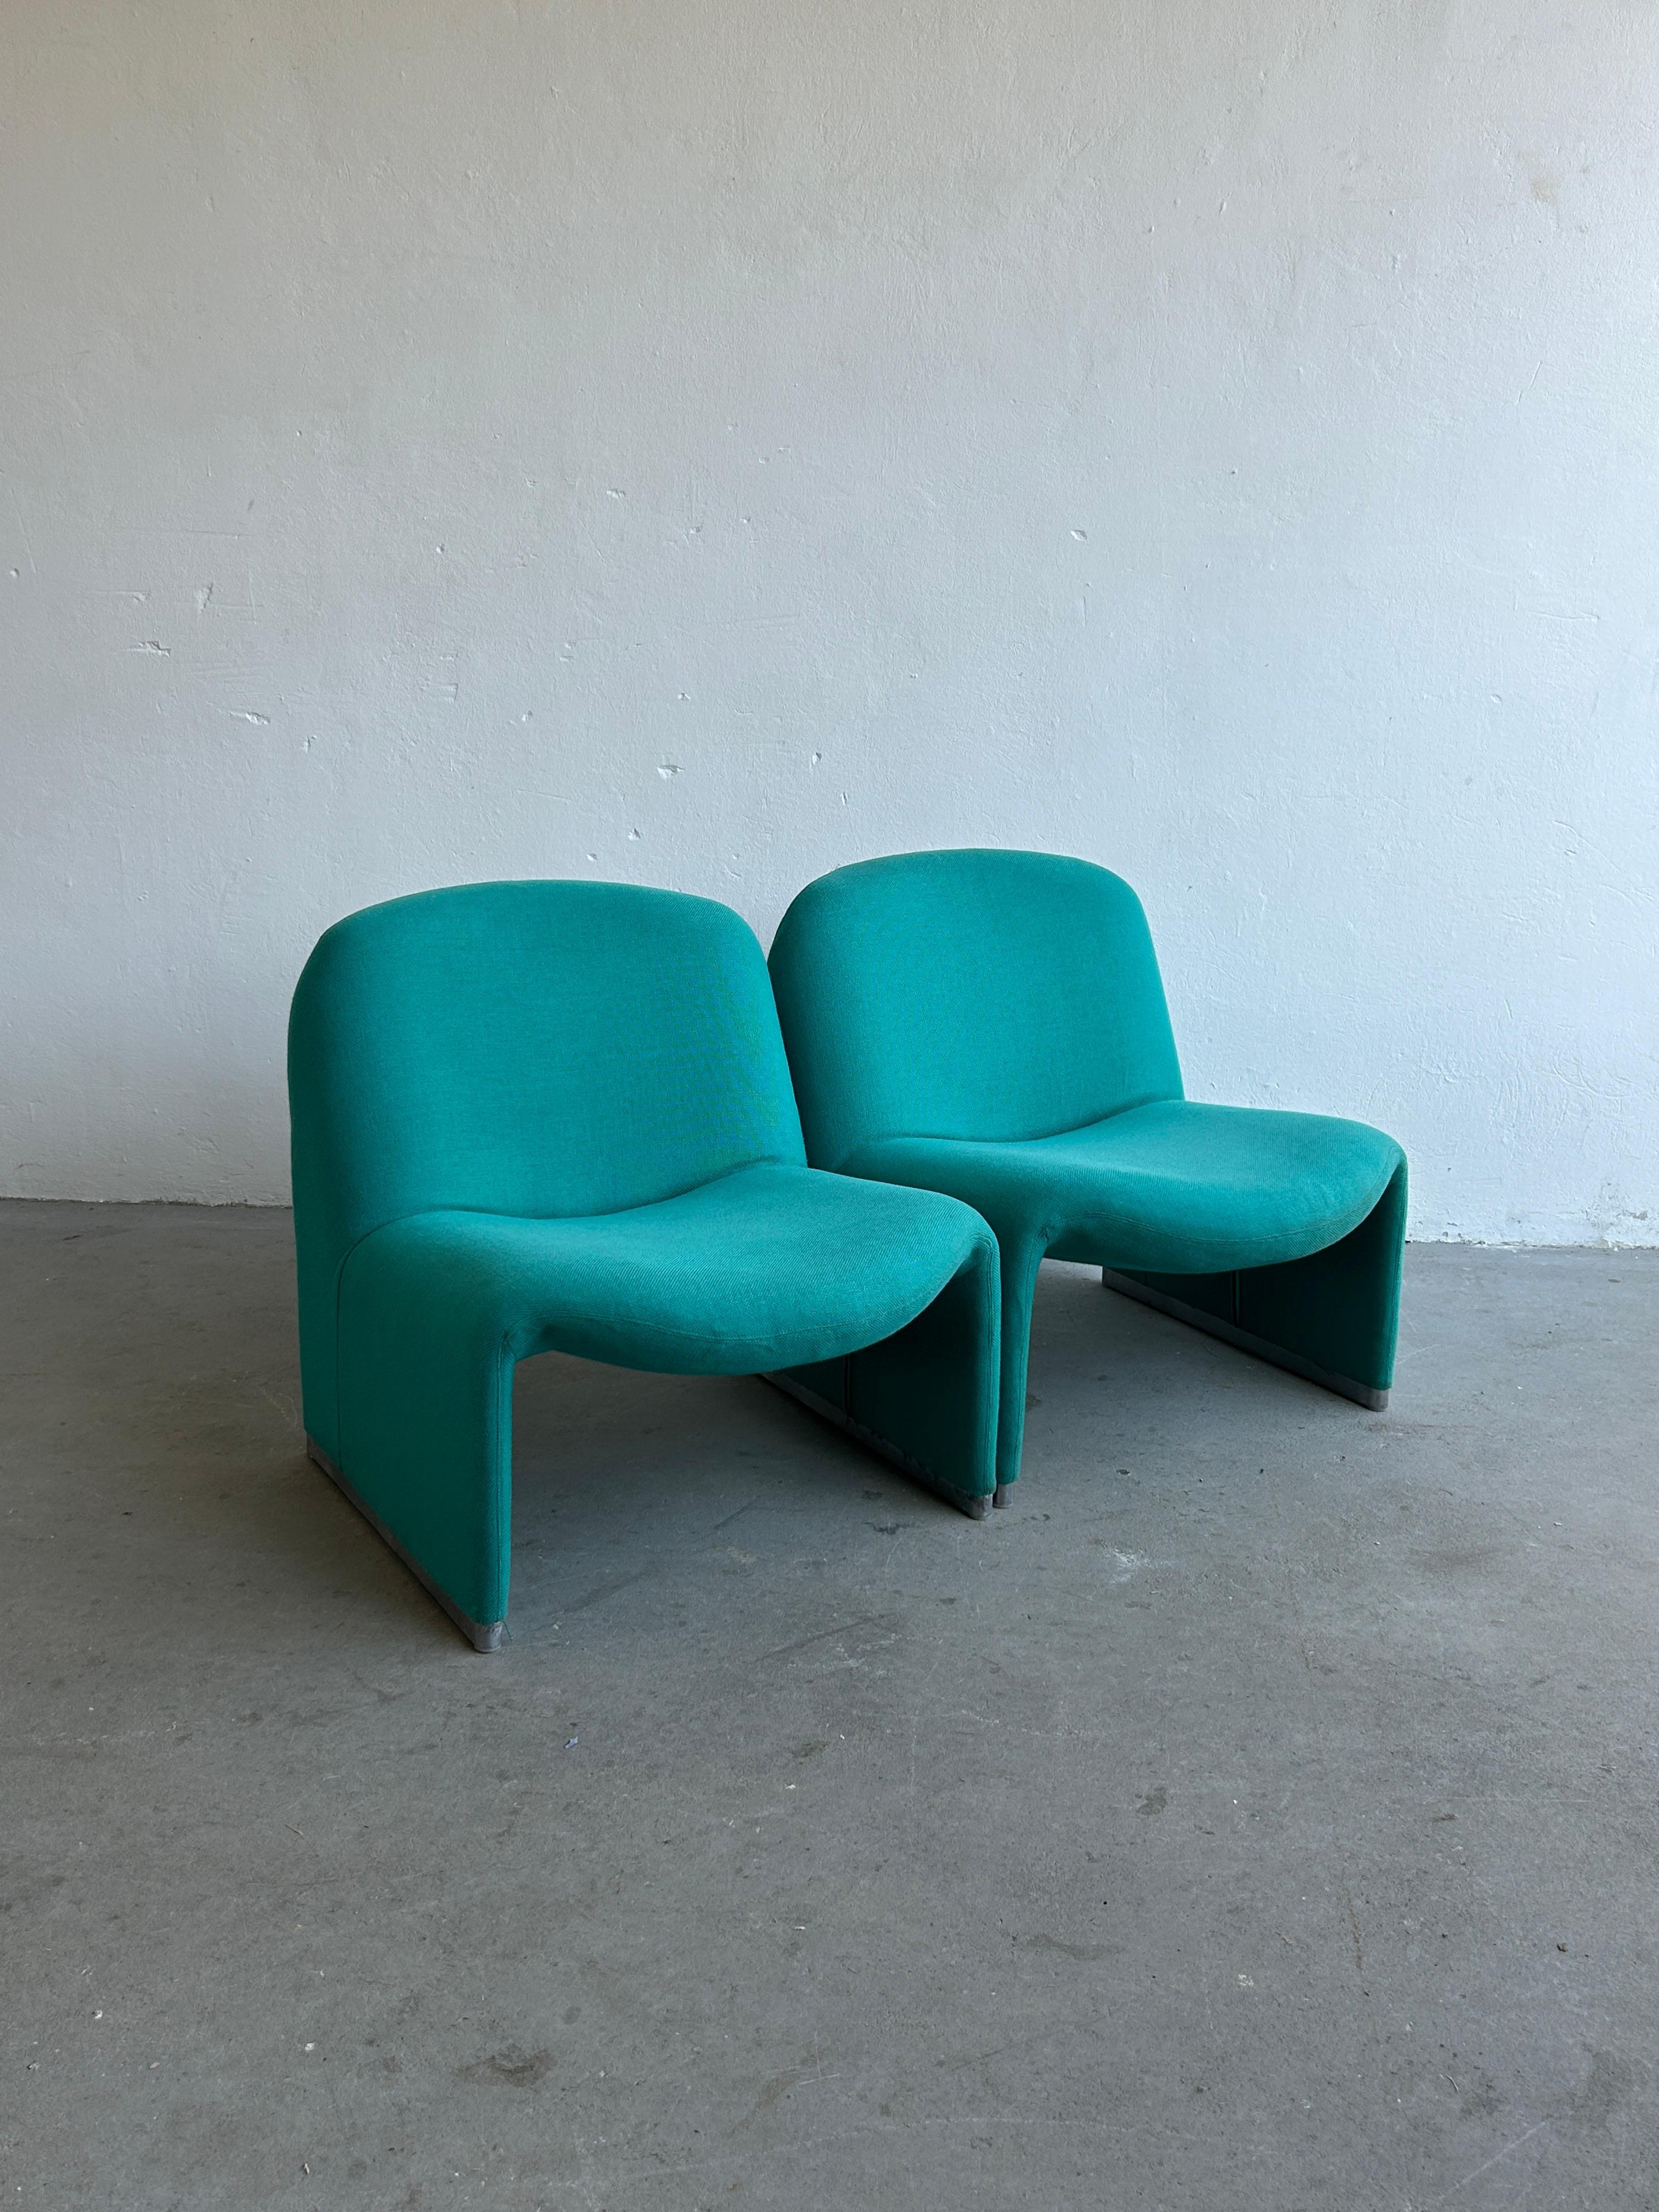 Metal Pair of Alky Chairs by Giancarlo Piretti for Anonima Castelli, 1970s Italy